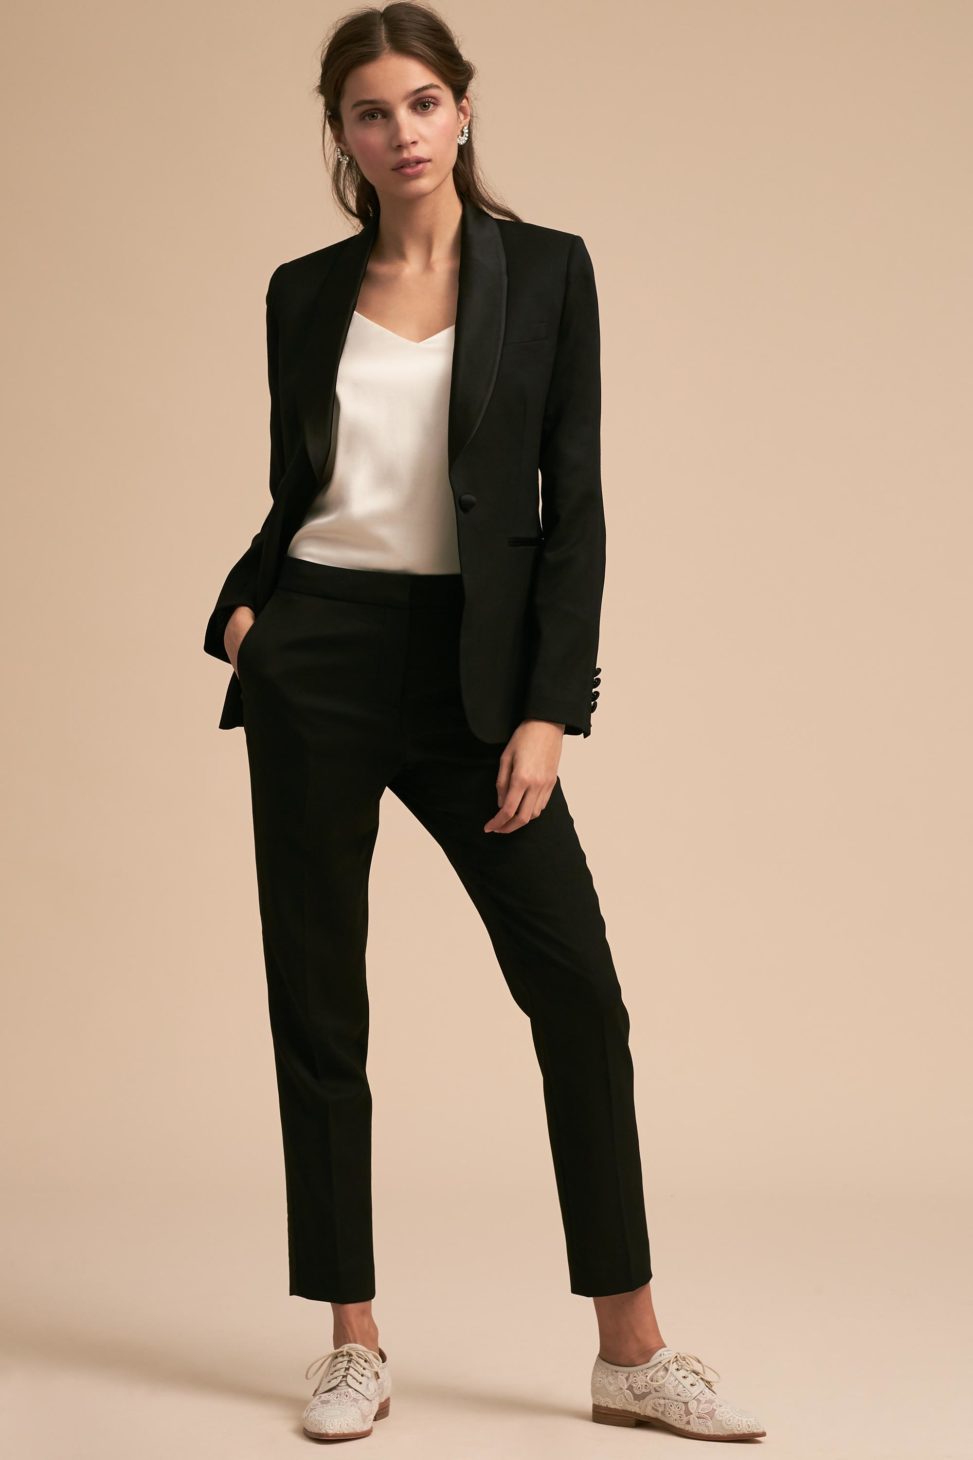 A woman stands, dressed in a black tuxedo jacket and black pants with white shoes.